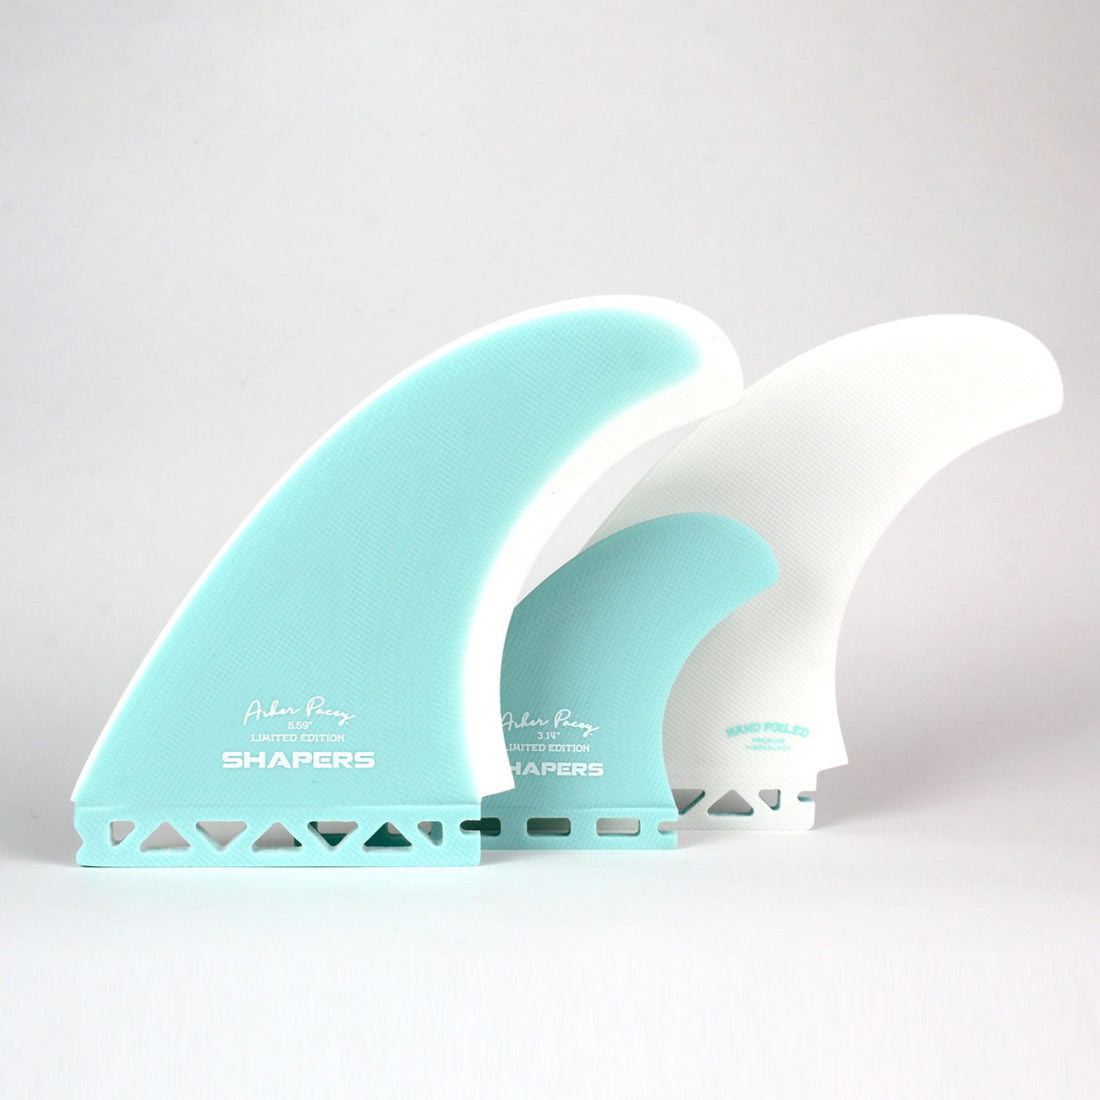 Shapers Fins - AP 5.59" (Futures) Asher Pacey Twin Fins + Trailer - Teal